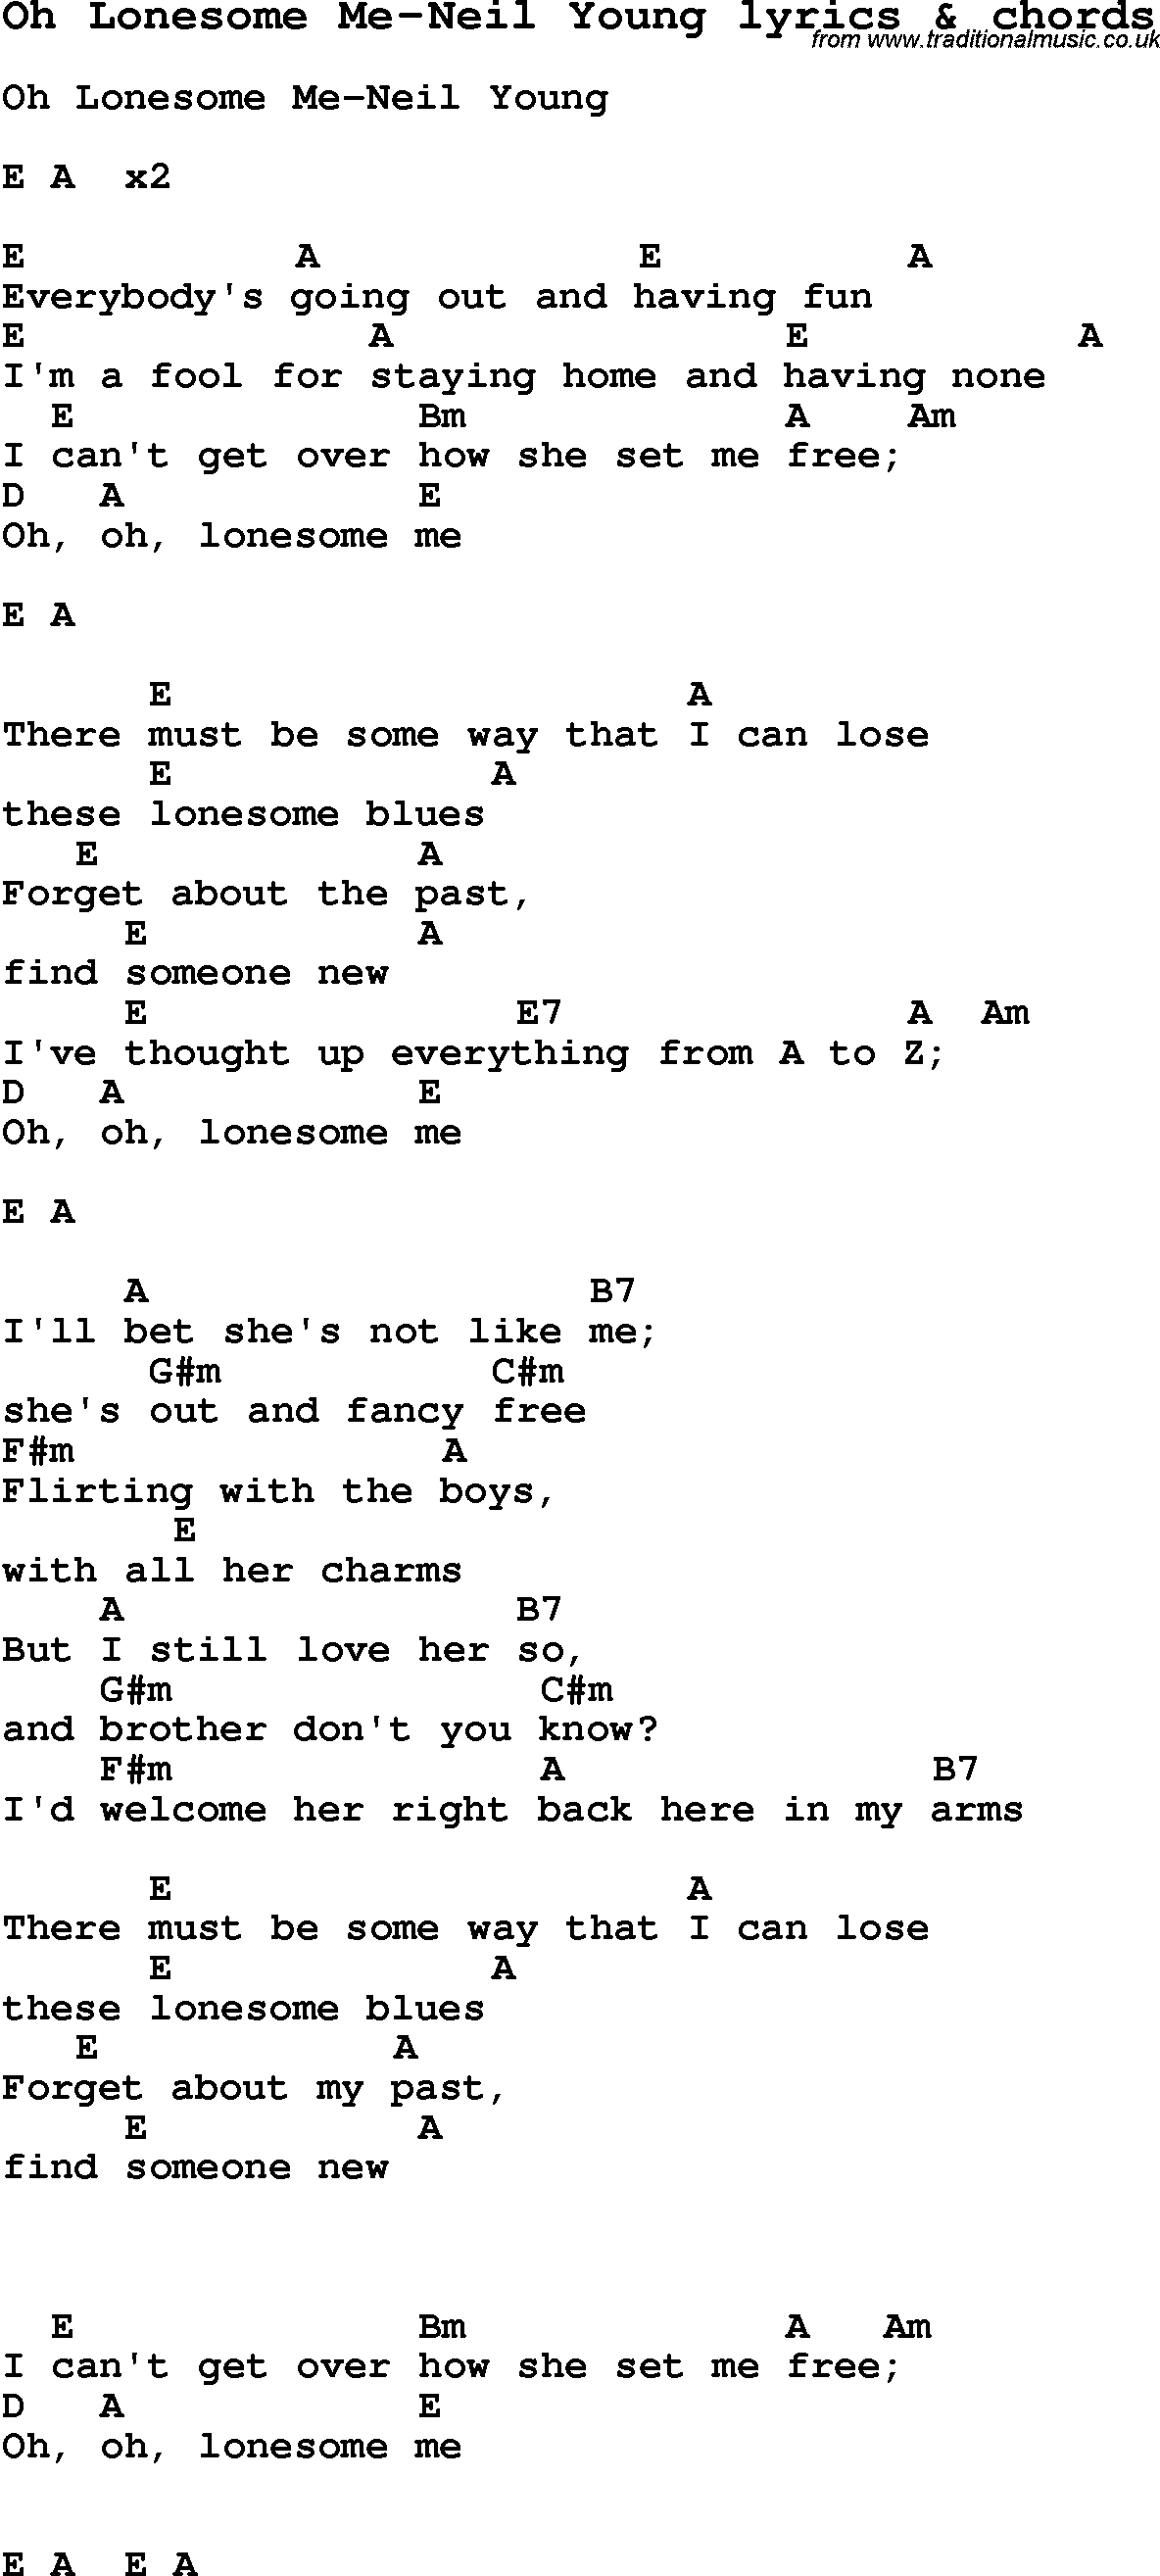 Love Song Lyrics for: Oh Lonesome Me-Neil Young with chords for Ukulele, Guitar Banjo etc.